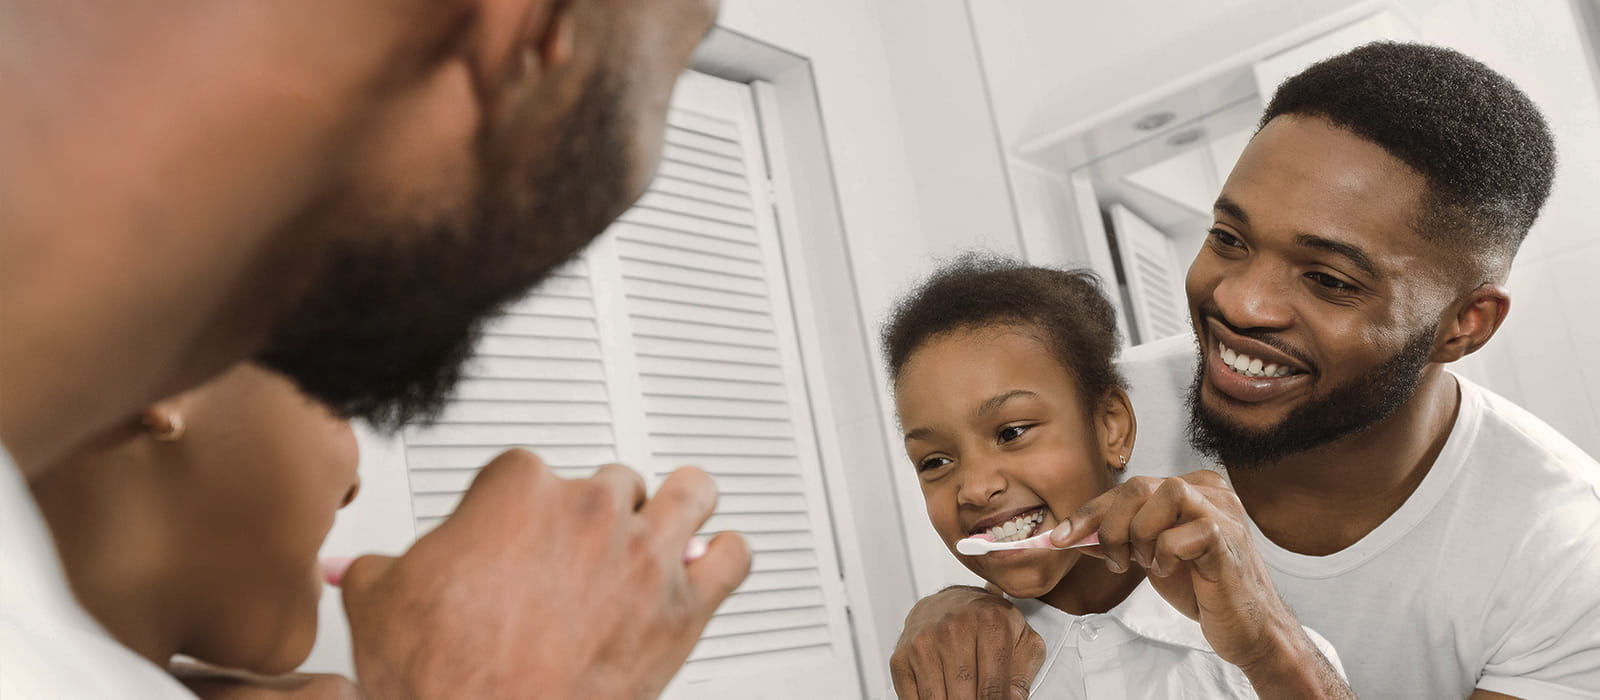 Father helping daughter brush her teeth.